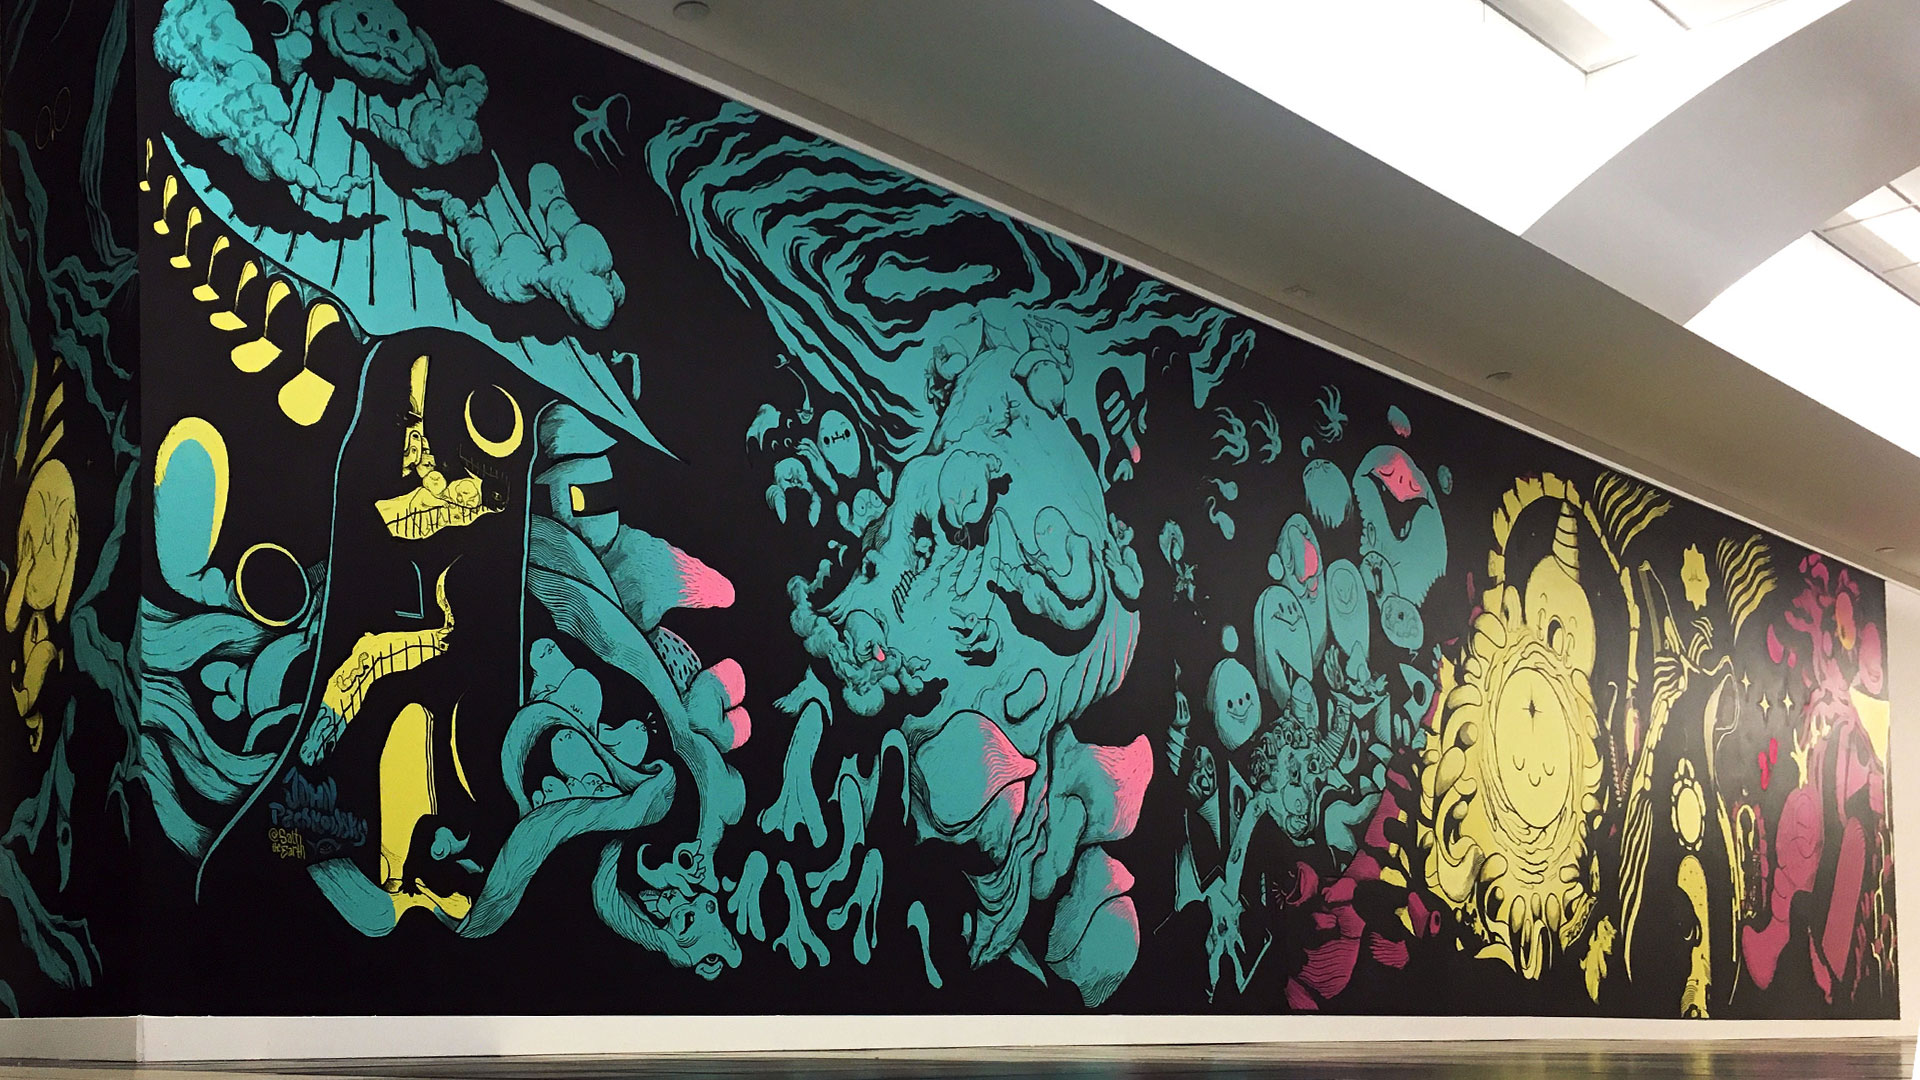 A wide angle shot of the completed mural’s entire span in a brightly lit mall corridor.